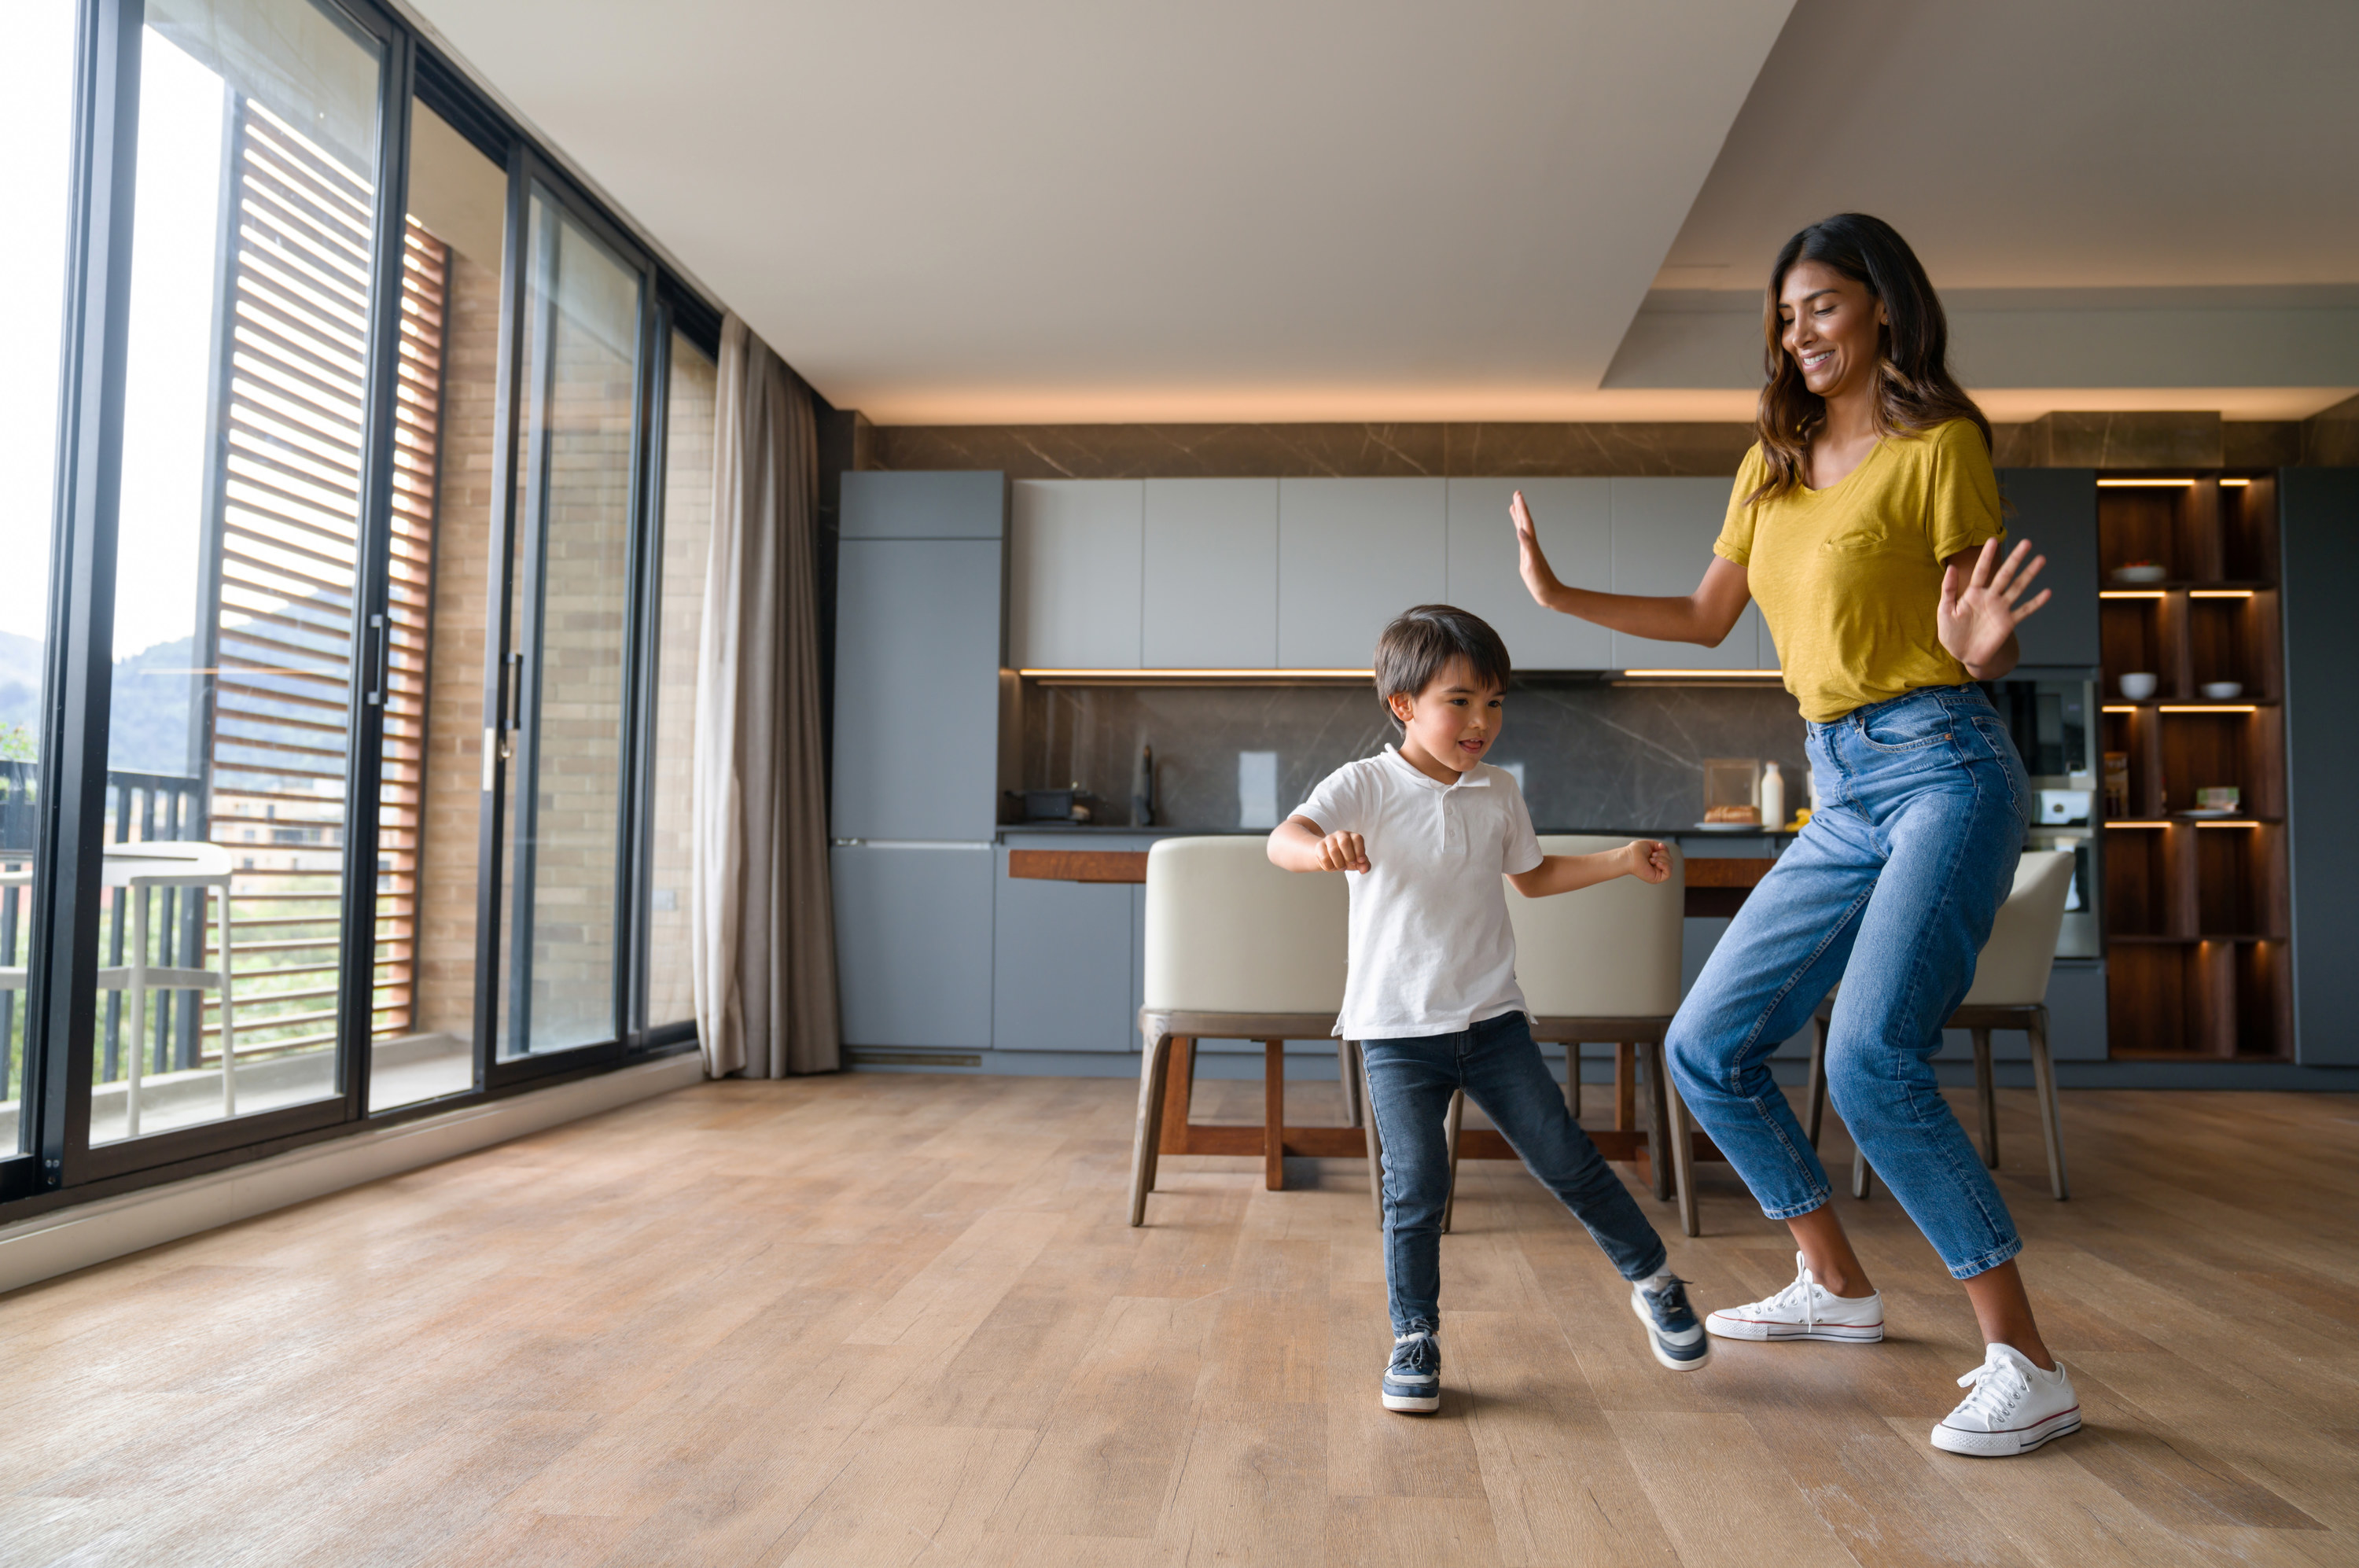 A woman dances with a young child at home